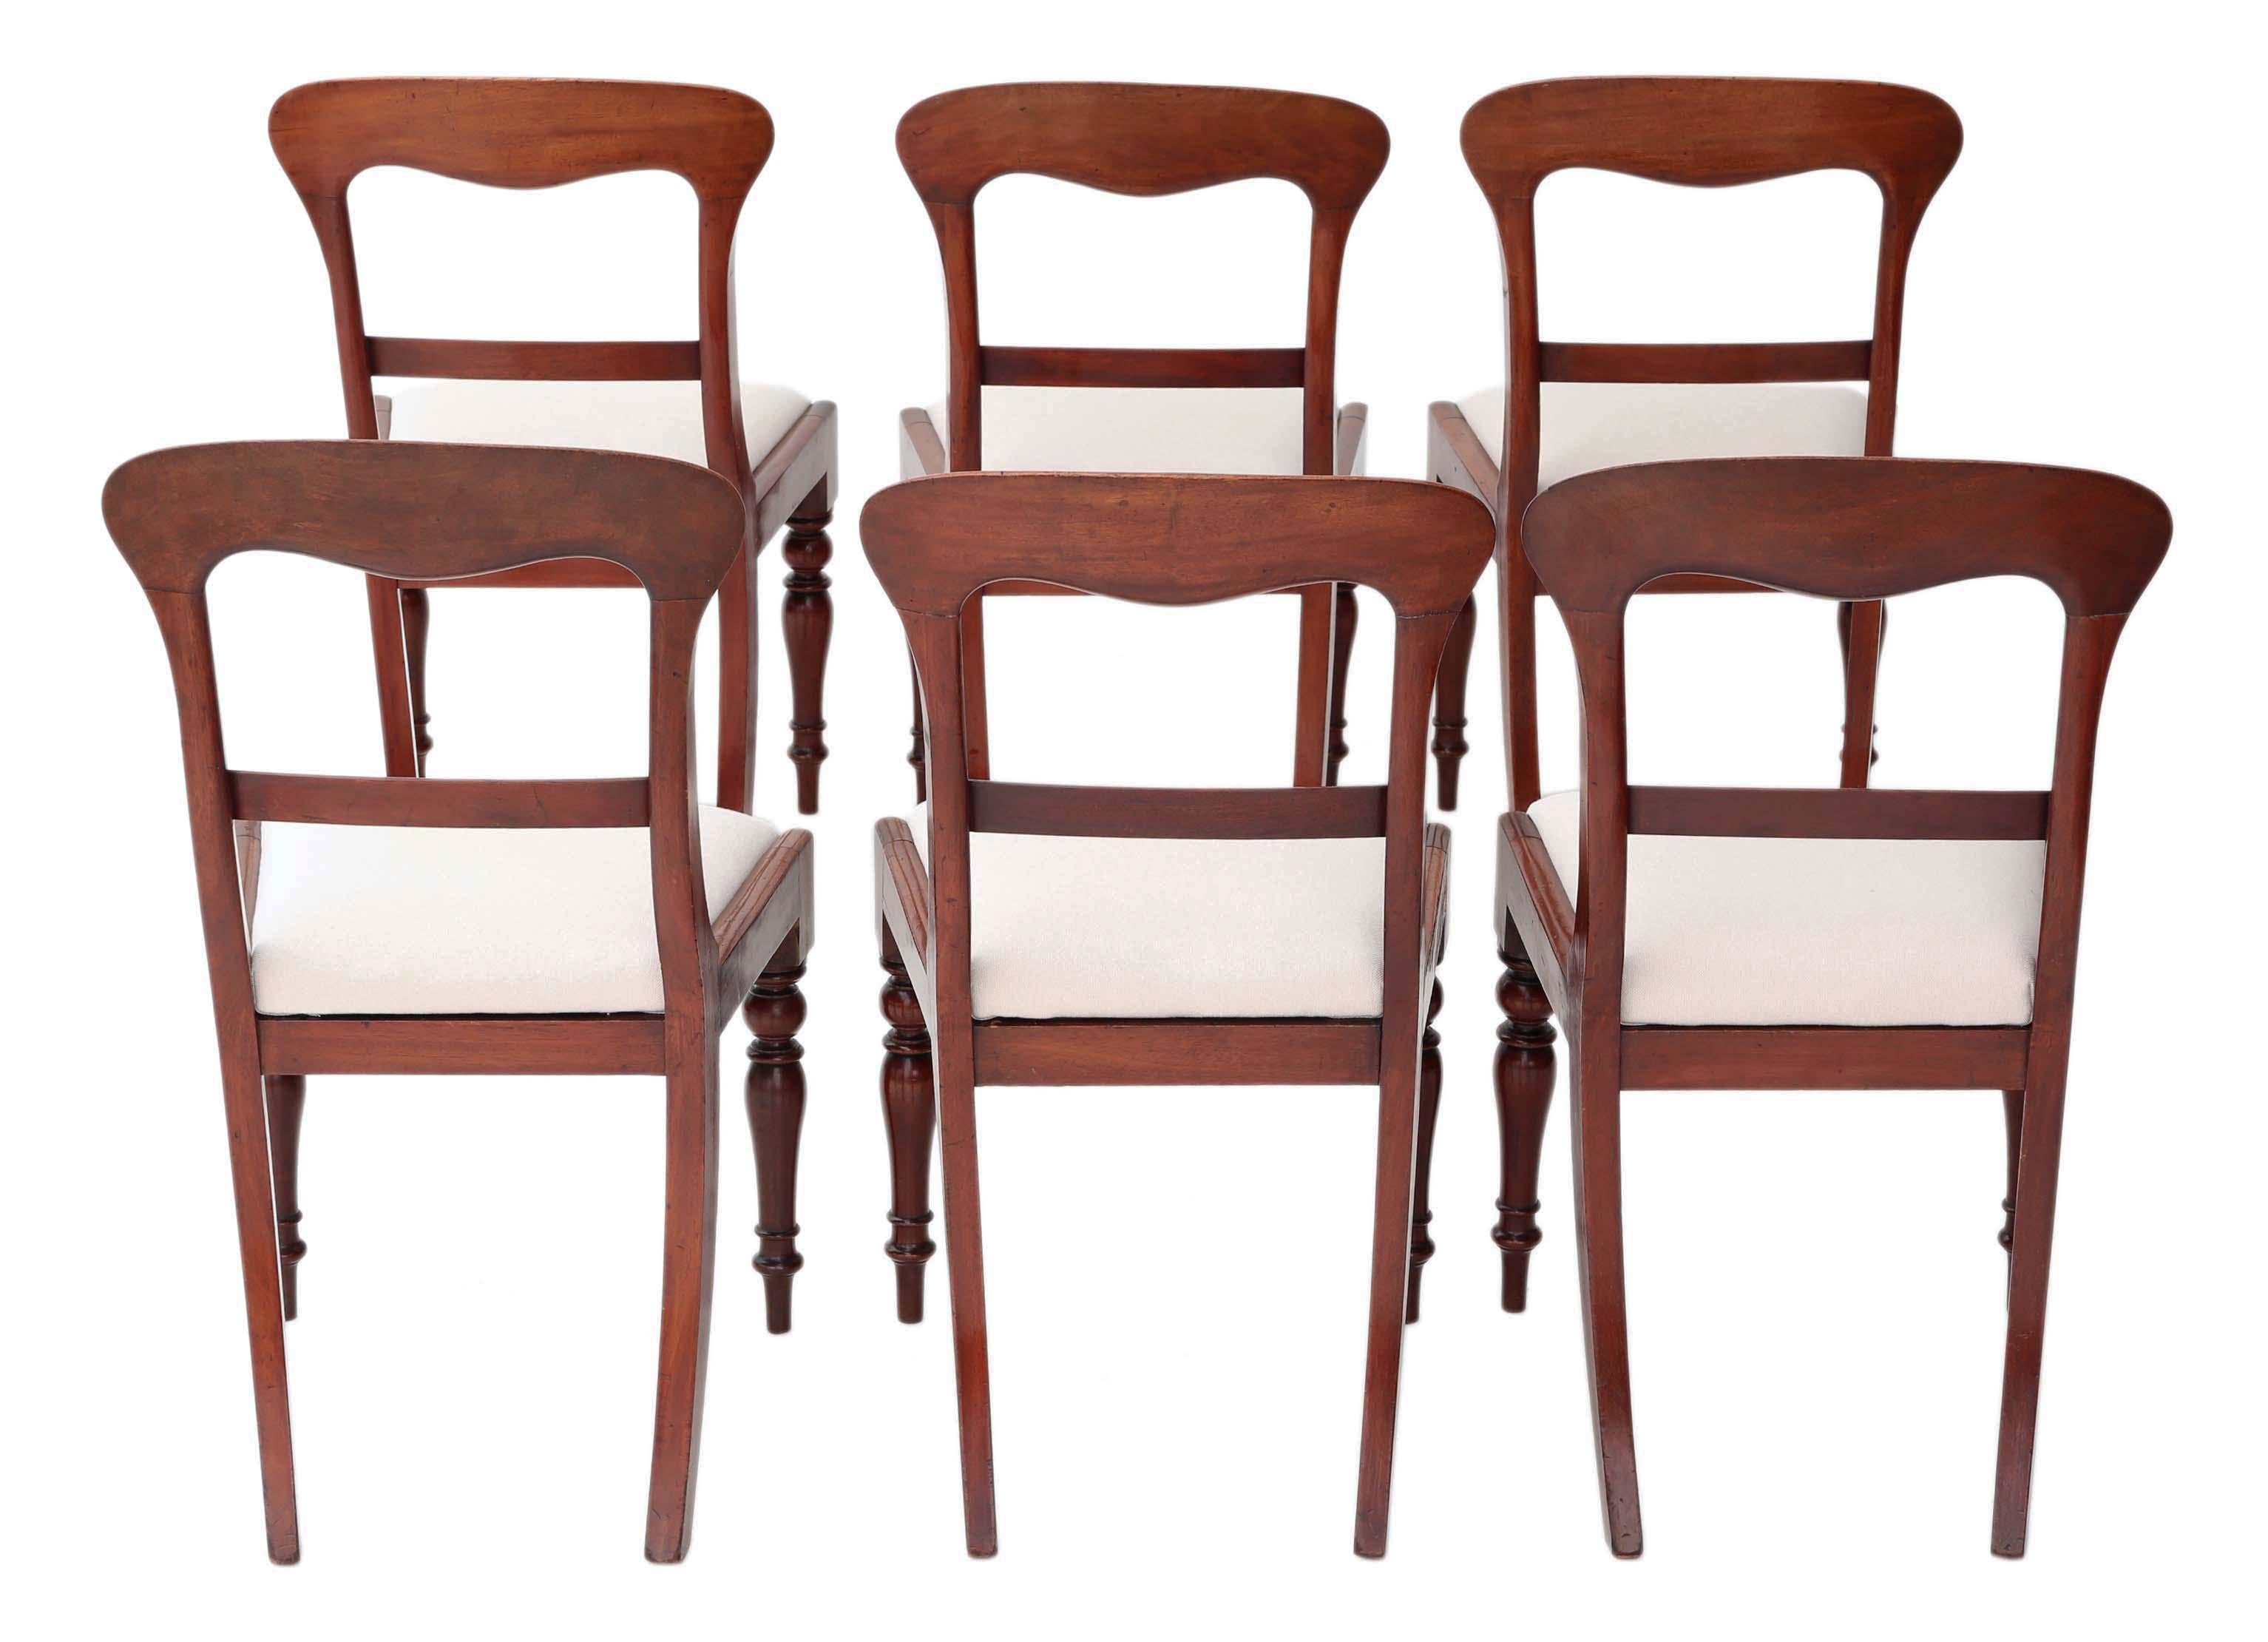 Antique fine quality set of 6 Victorian mahogany dining chairs, circa 1850.
Solid, heavy and strong with no loose joints. Lovely simple elegant design.
Recent upholstery in a heavy weight upholstery fabric, with an off white color.
Overall